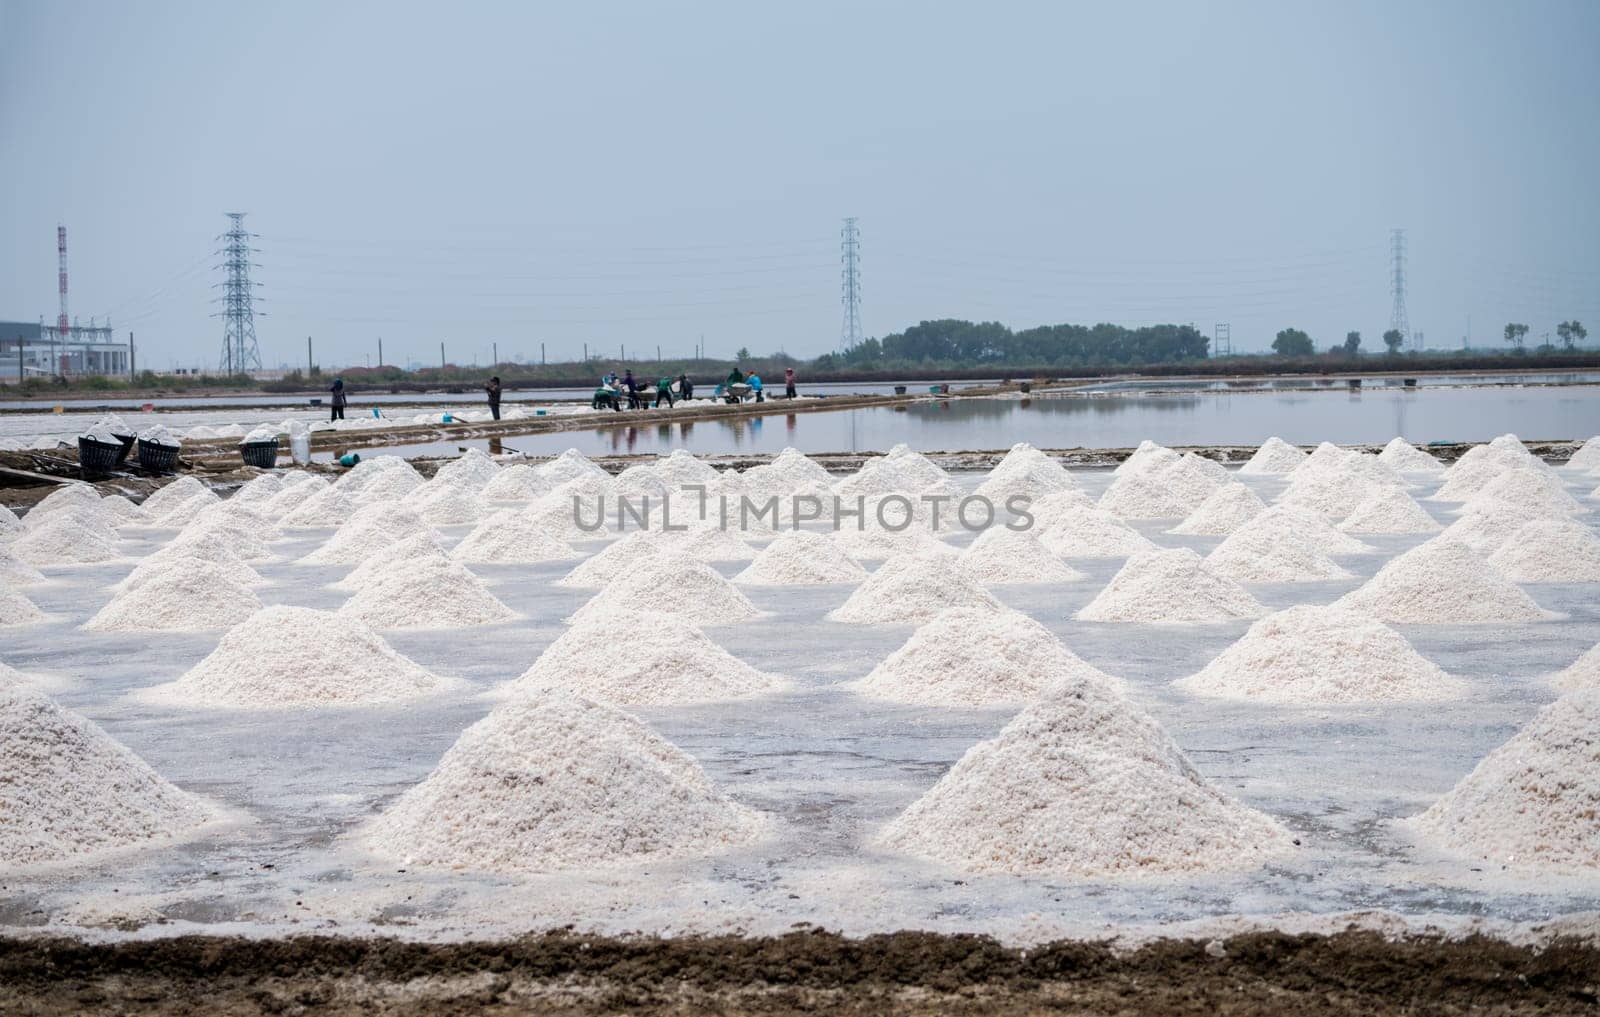 Sea salt farm in Thailand. Brine salt. Raw material of salt industrial. Sodium Chloride. Evaporation and crystallization of sea water. Worker working on a farm. Salt harvesting. Agriculture industry. by Fahroni